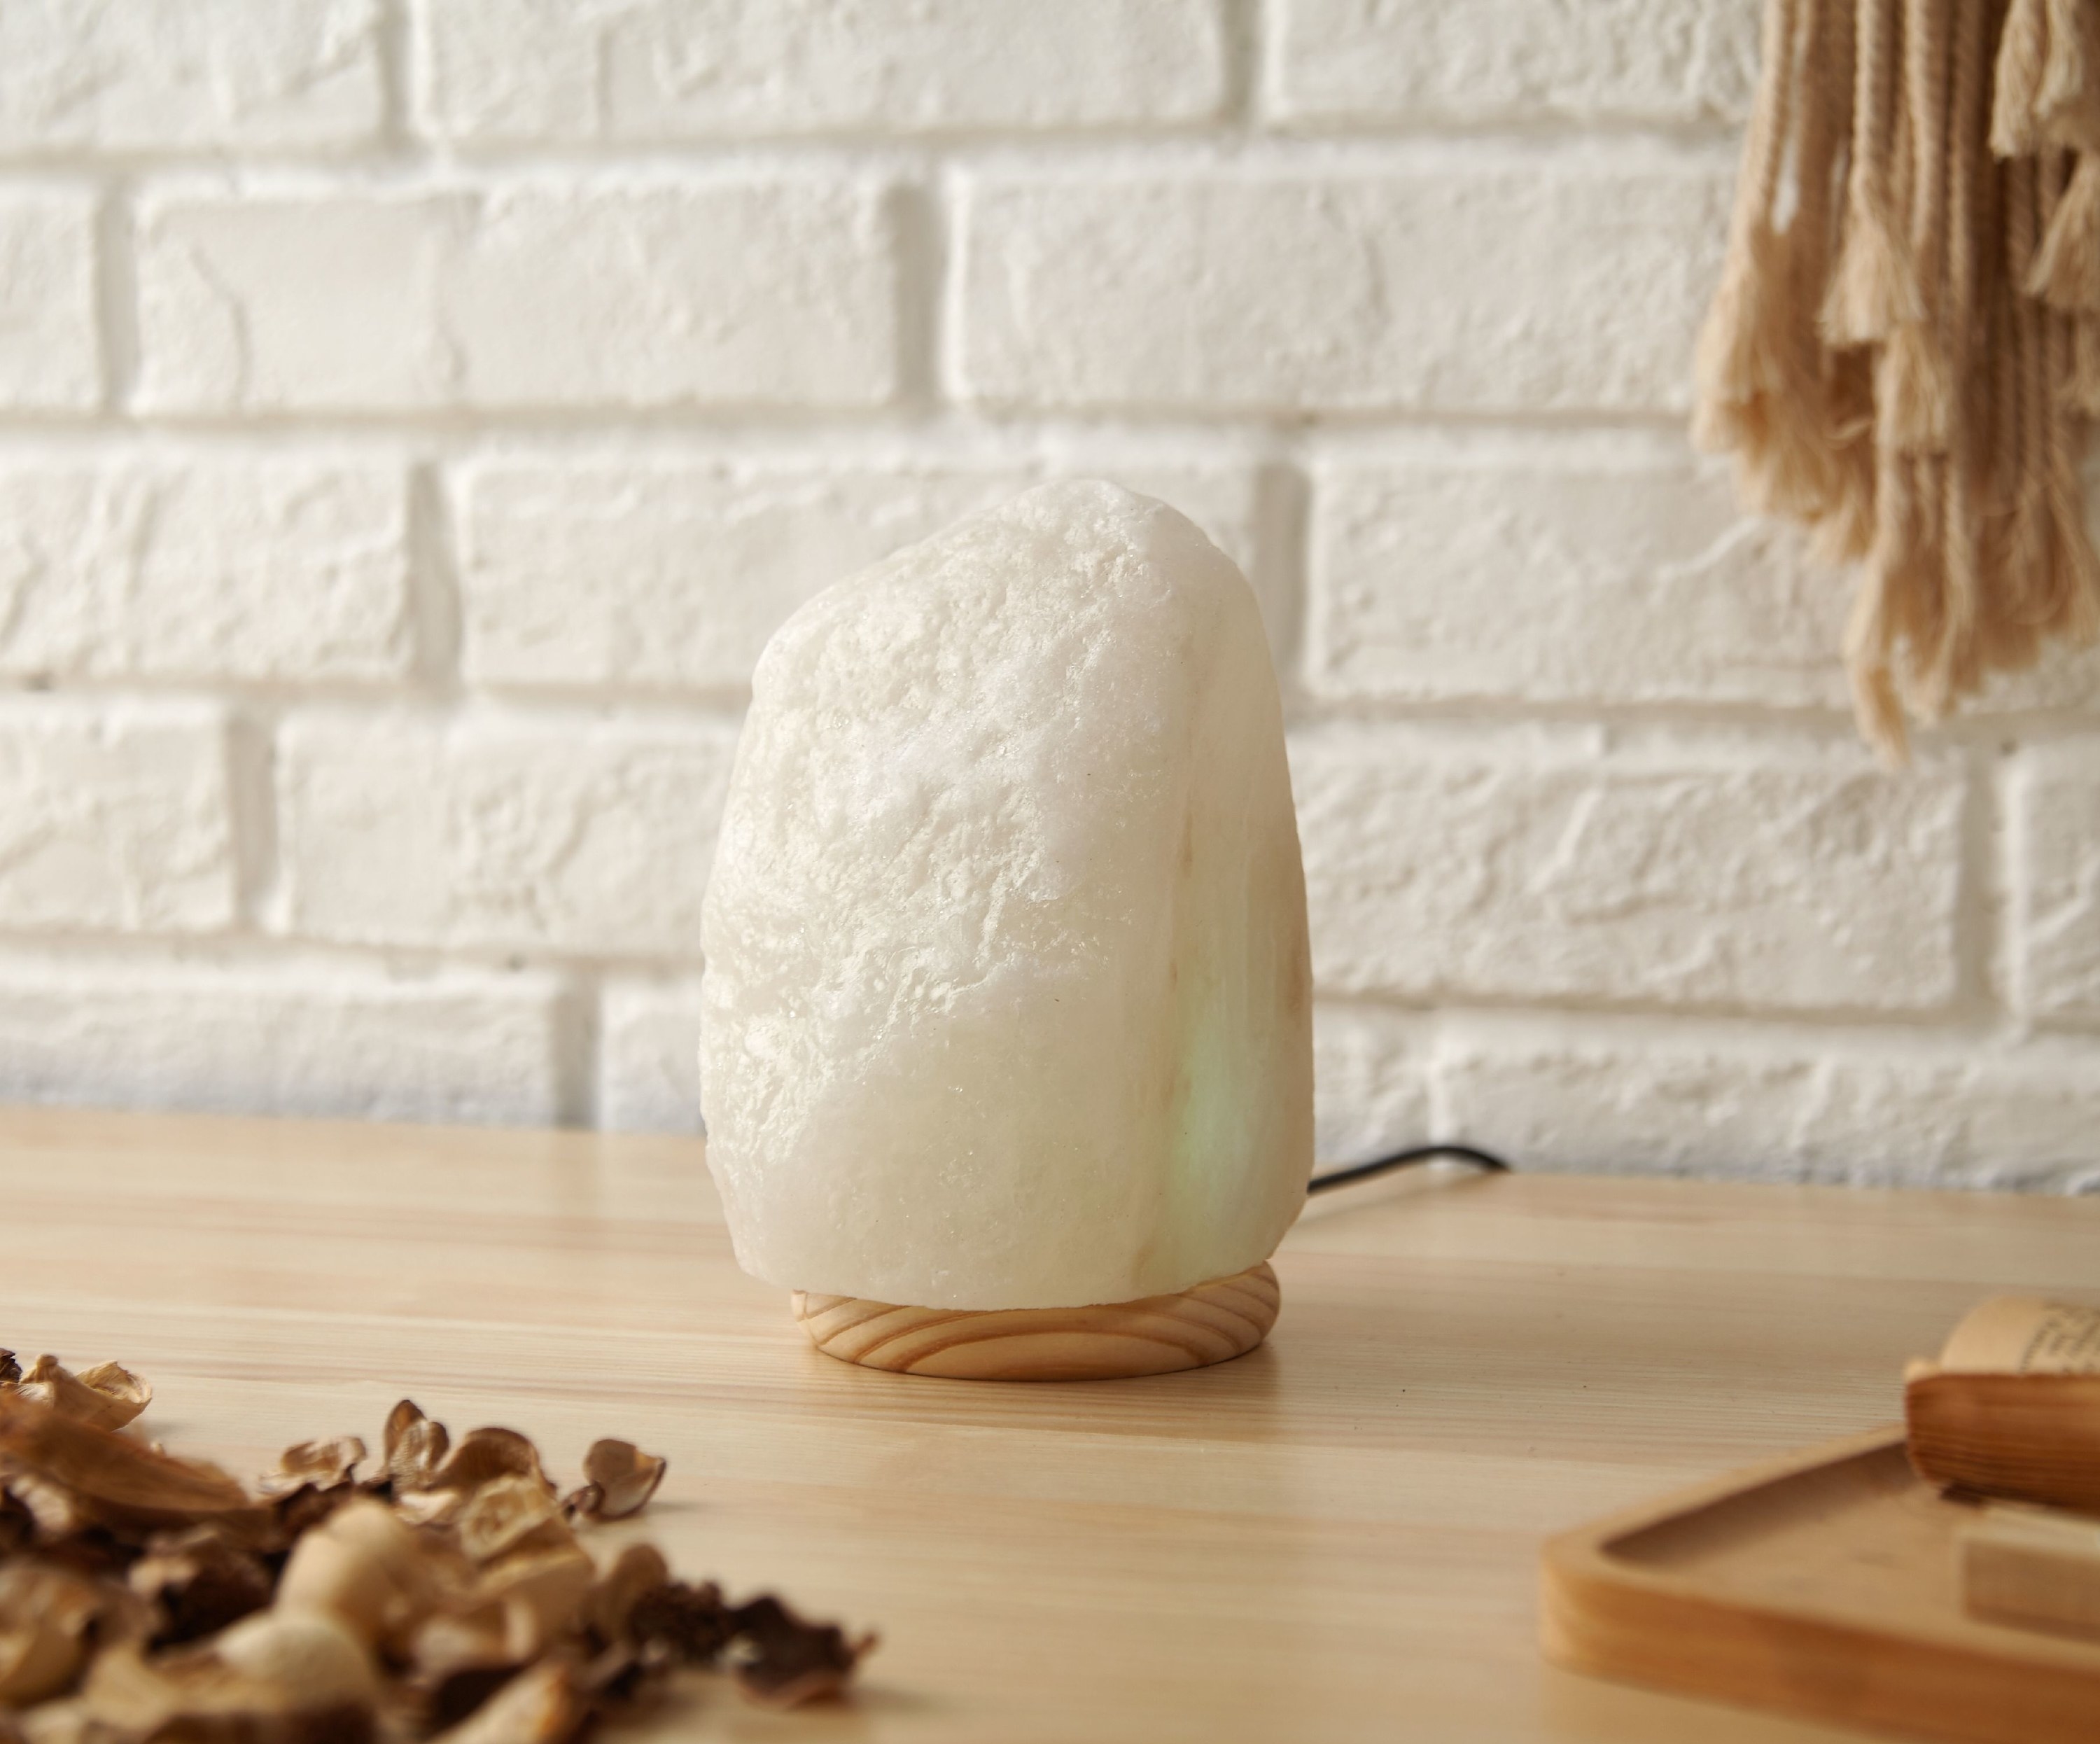 A white salt lamp with a wooden base on a table